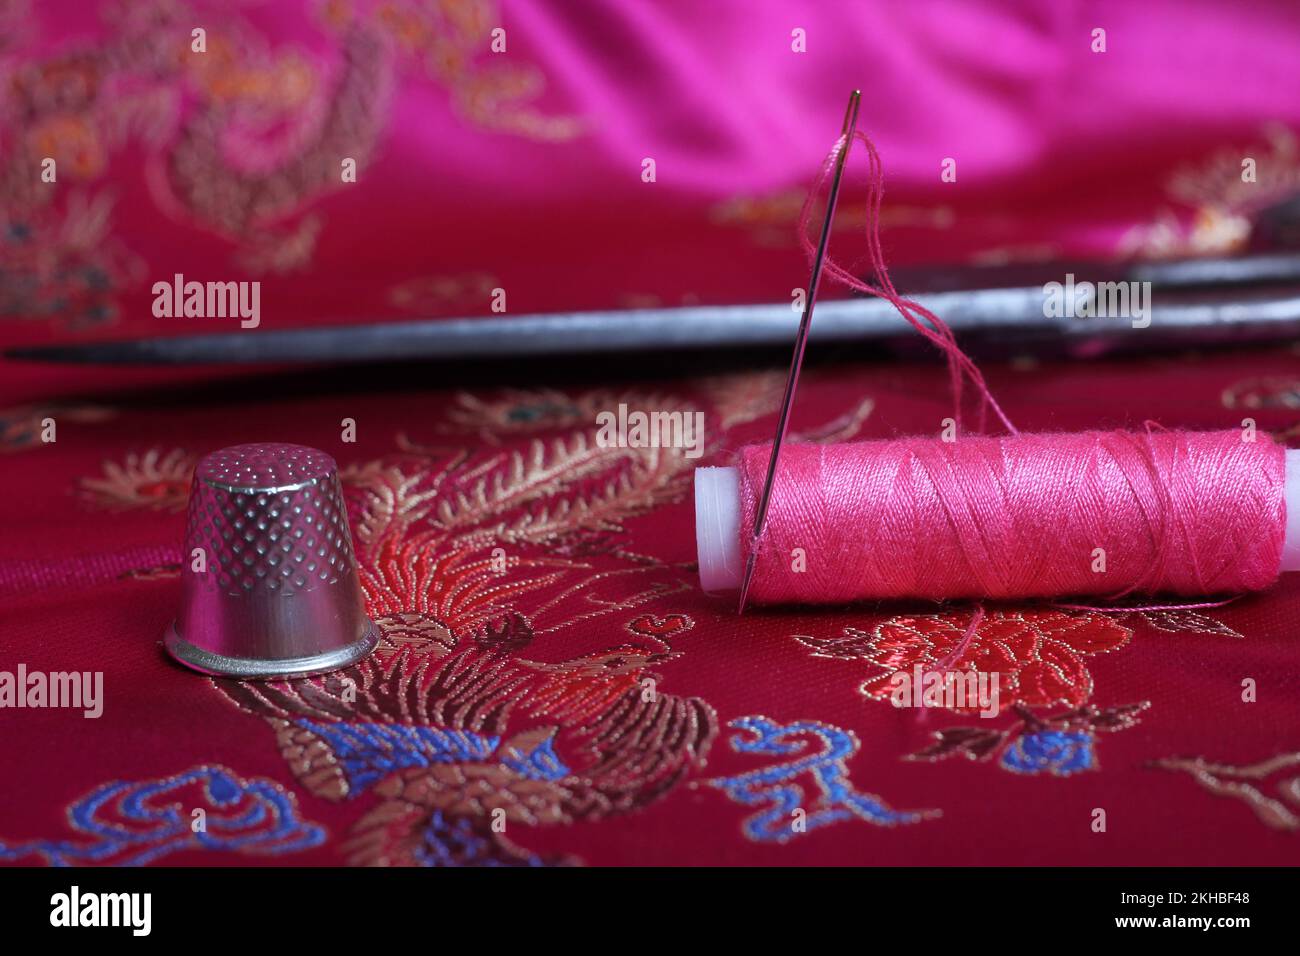 Spool of Pink Thread and Thimble on Vintage Pink Satin Stock Photo